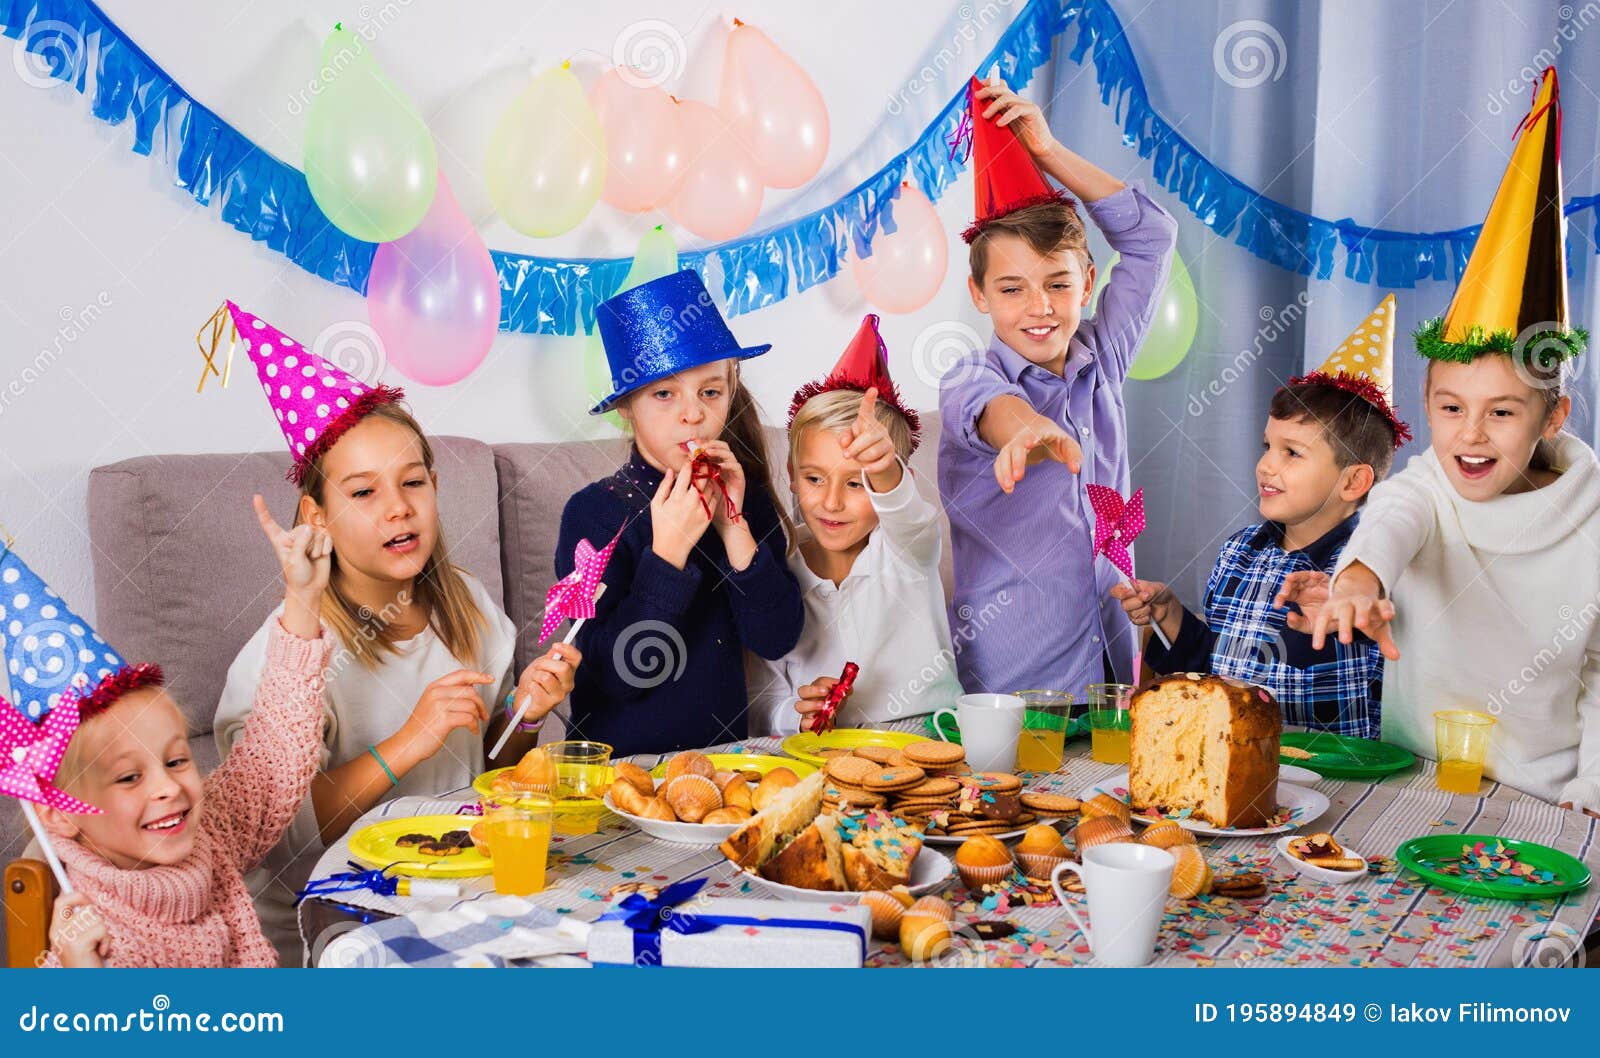 Boys and Girls Behaving Jokingly during Friend Birthday Party Stock ...